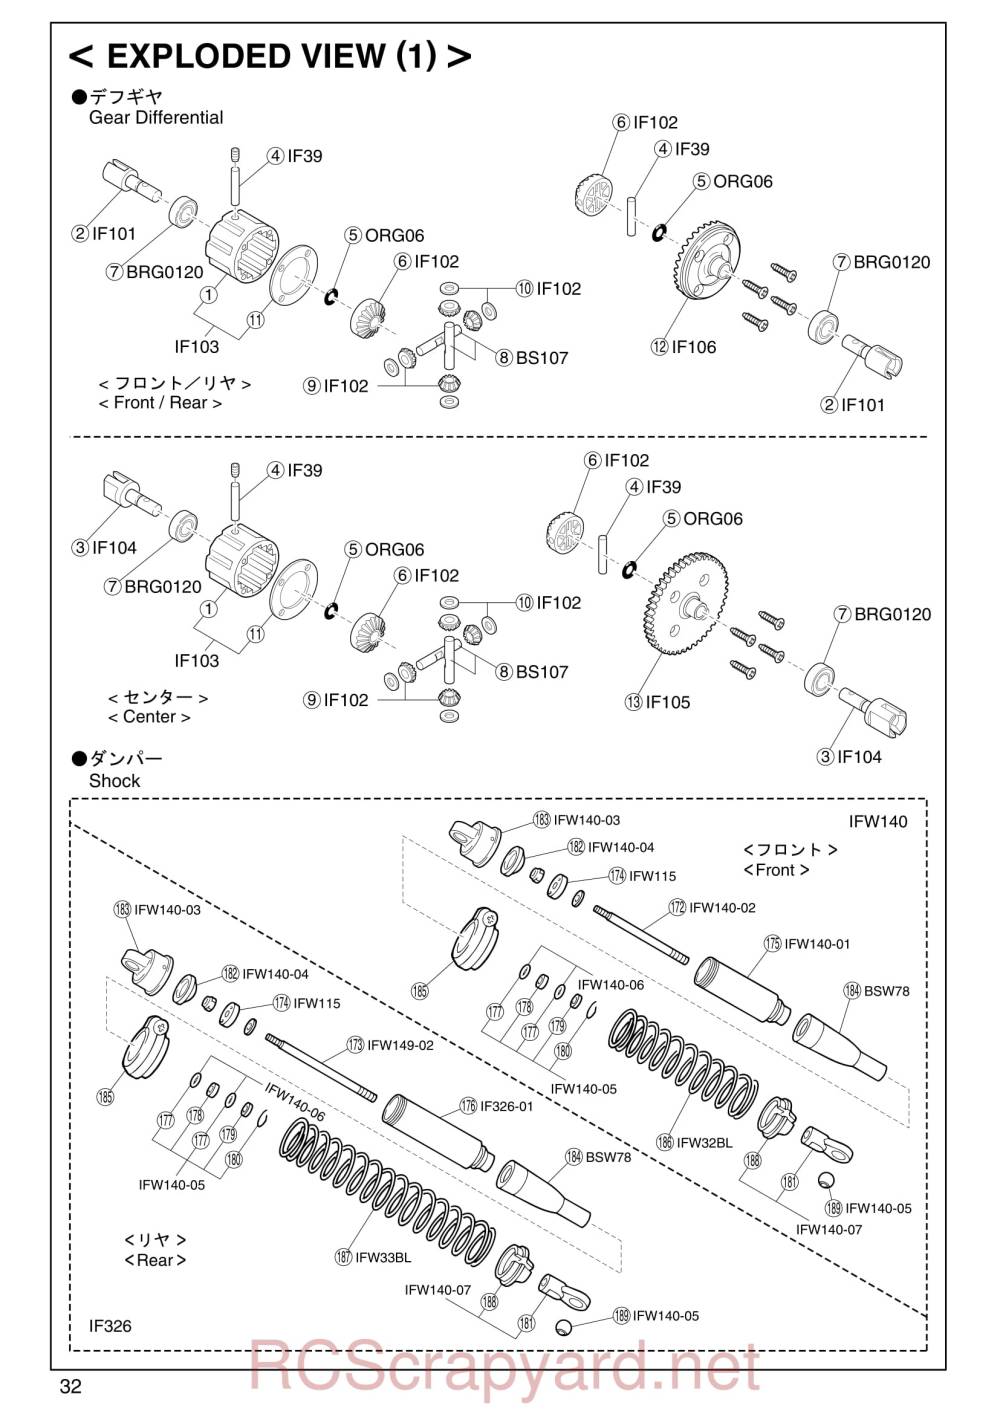 Kyosho Inferno MP-777 - Exploded View - Page 2